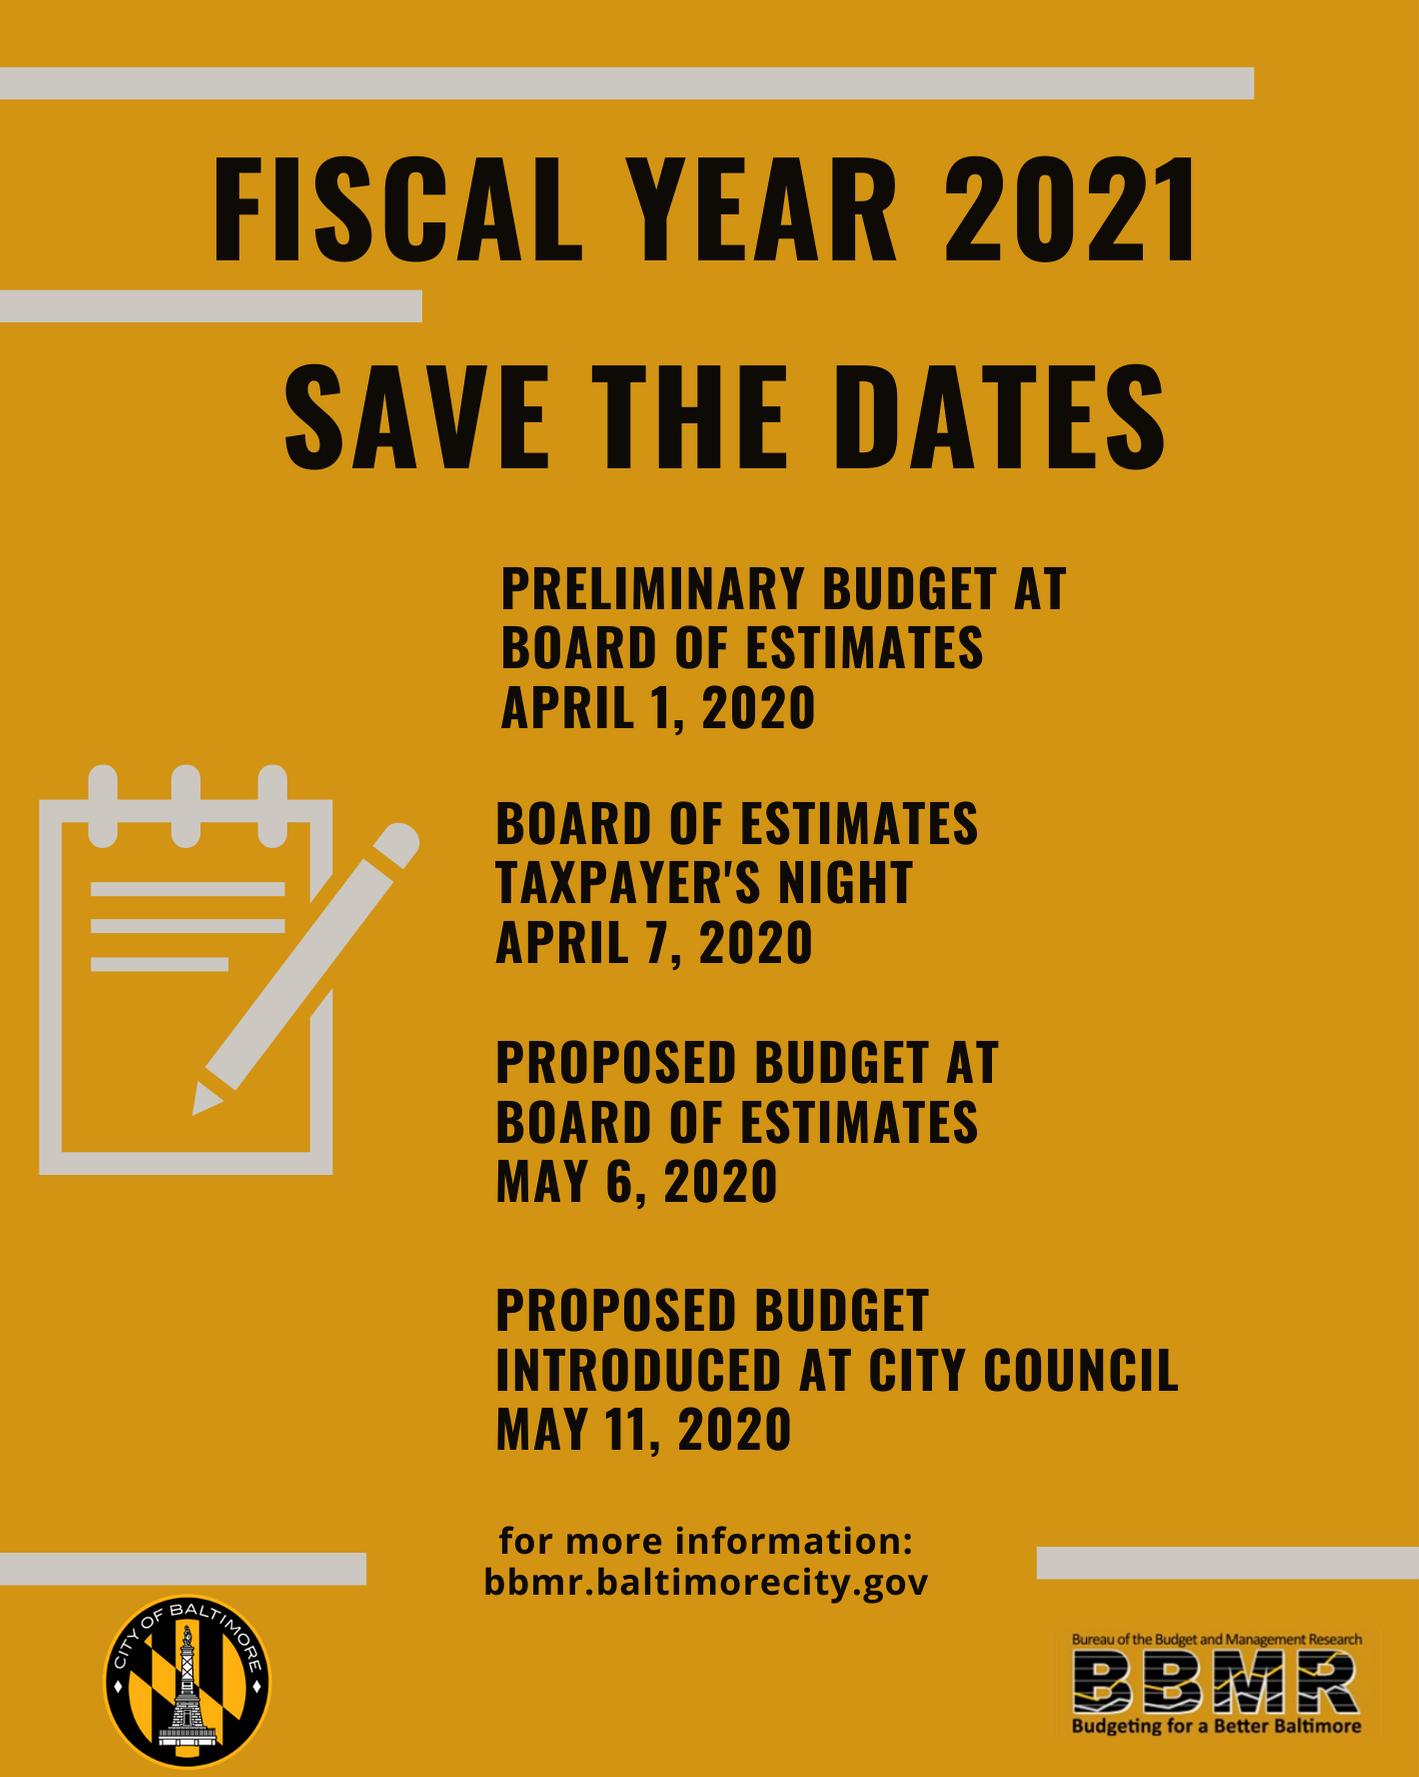 Major dates for Fiscal Year 2021 budget planning